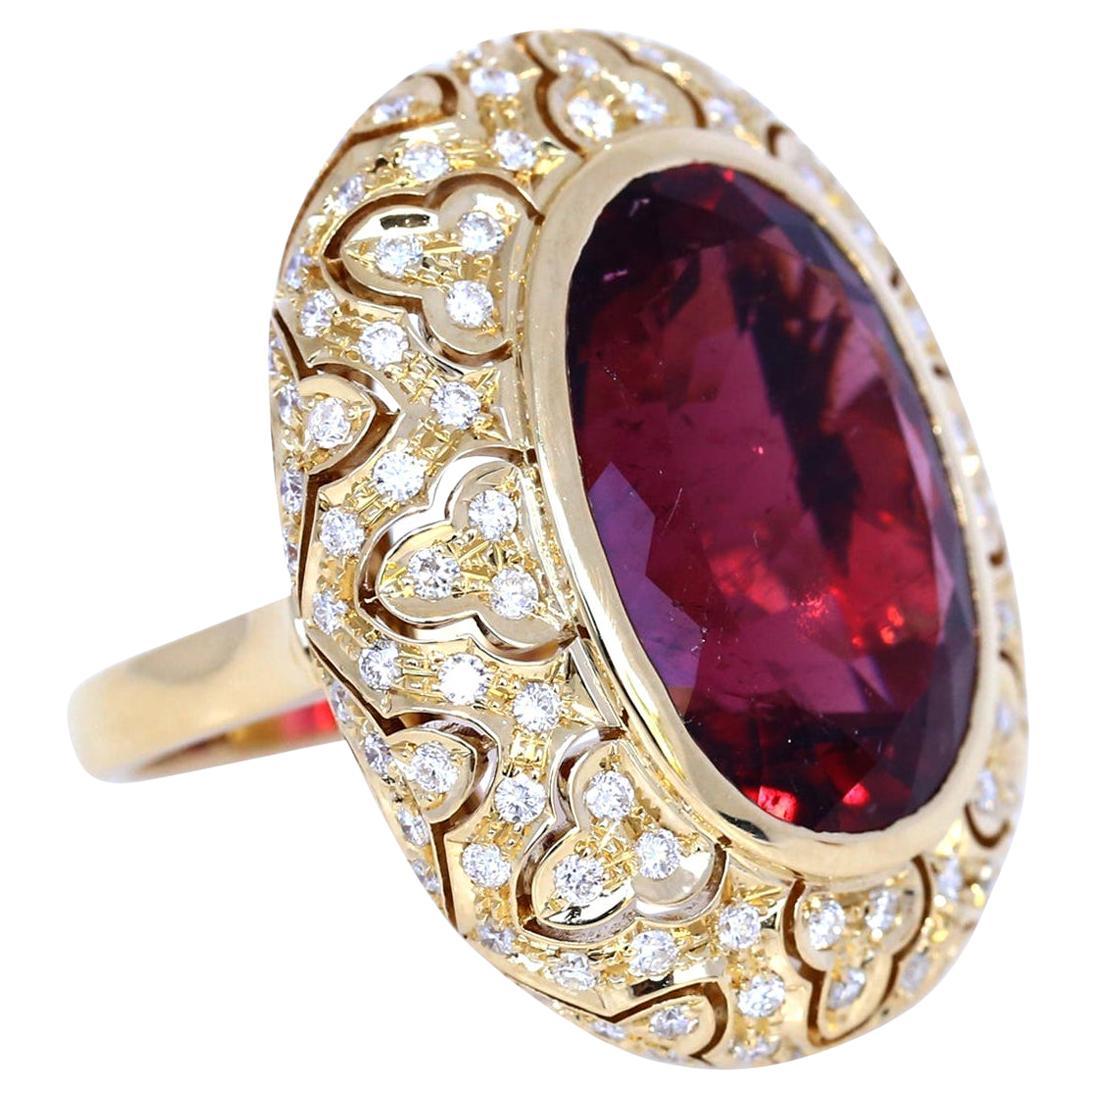 Massive Tourmaline 33Ct Yellow 18K Gold Diamonds Ring. 
Looks perfect on hand, attracts attention and yet does not look heavy. A very sophisticated design. 
Exceptional craft quality.  The stone has a very deep and rich color which suites perfectly